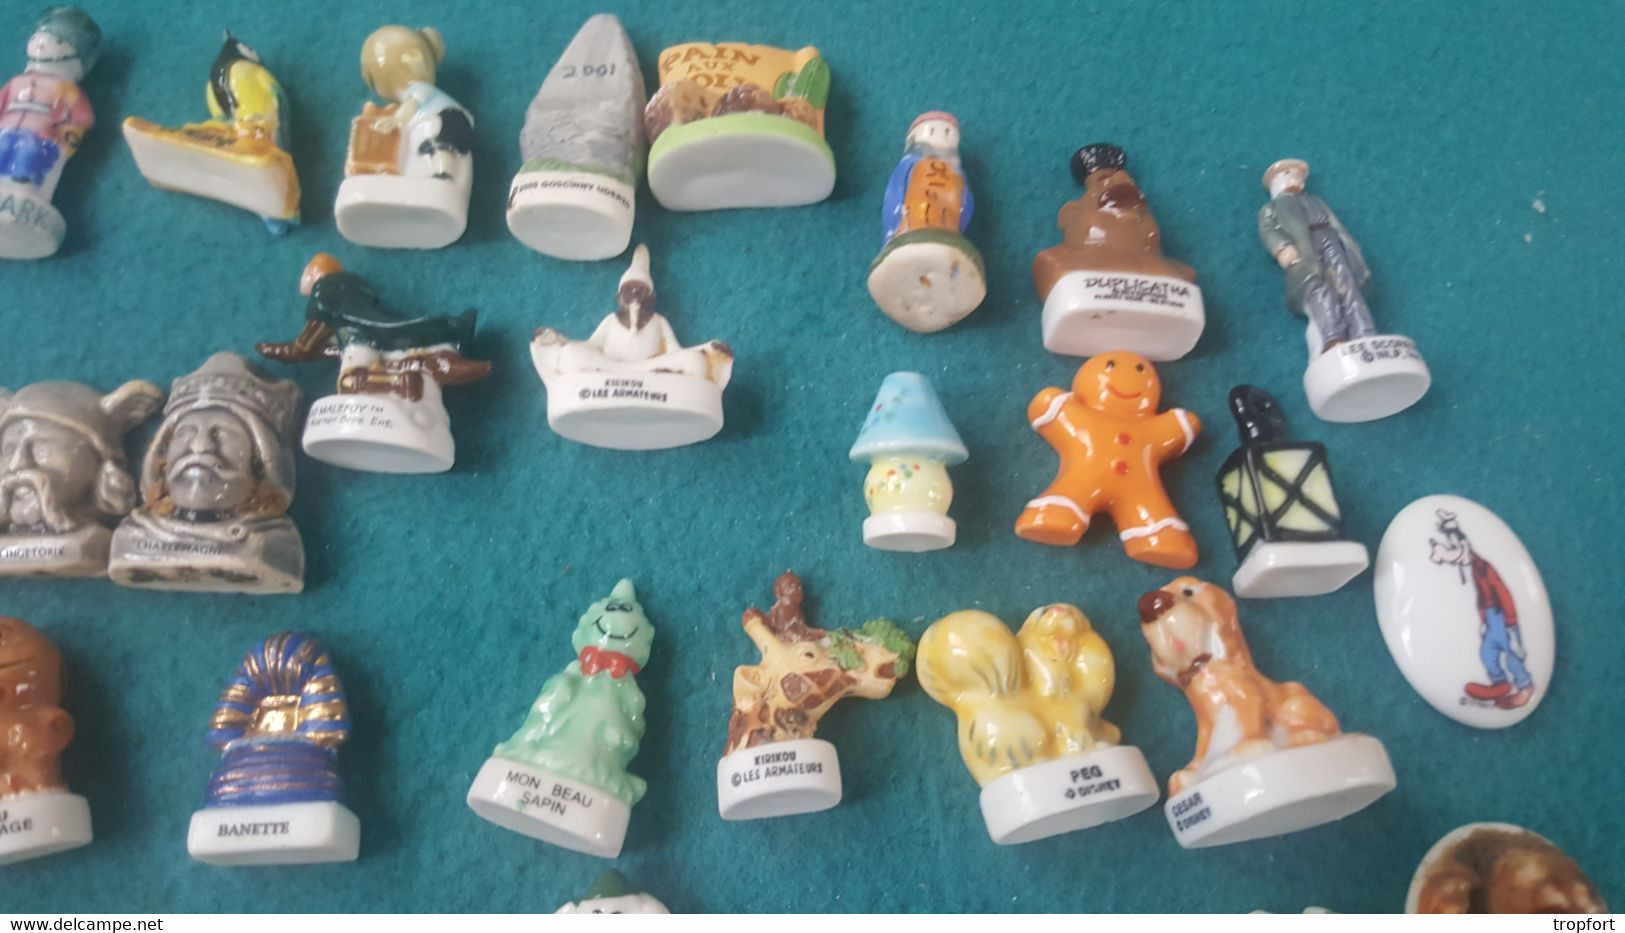 @@@   Lot 80 + FEVE ANCIENNES  A DETERMINER @@@@@@@@@@@ LOT FEVES / FIGURINES MINIATURES / FEVE GALETTE